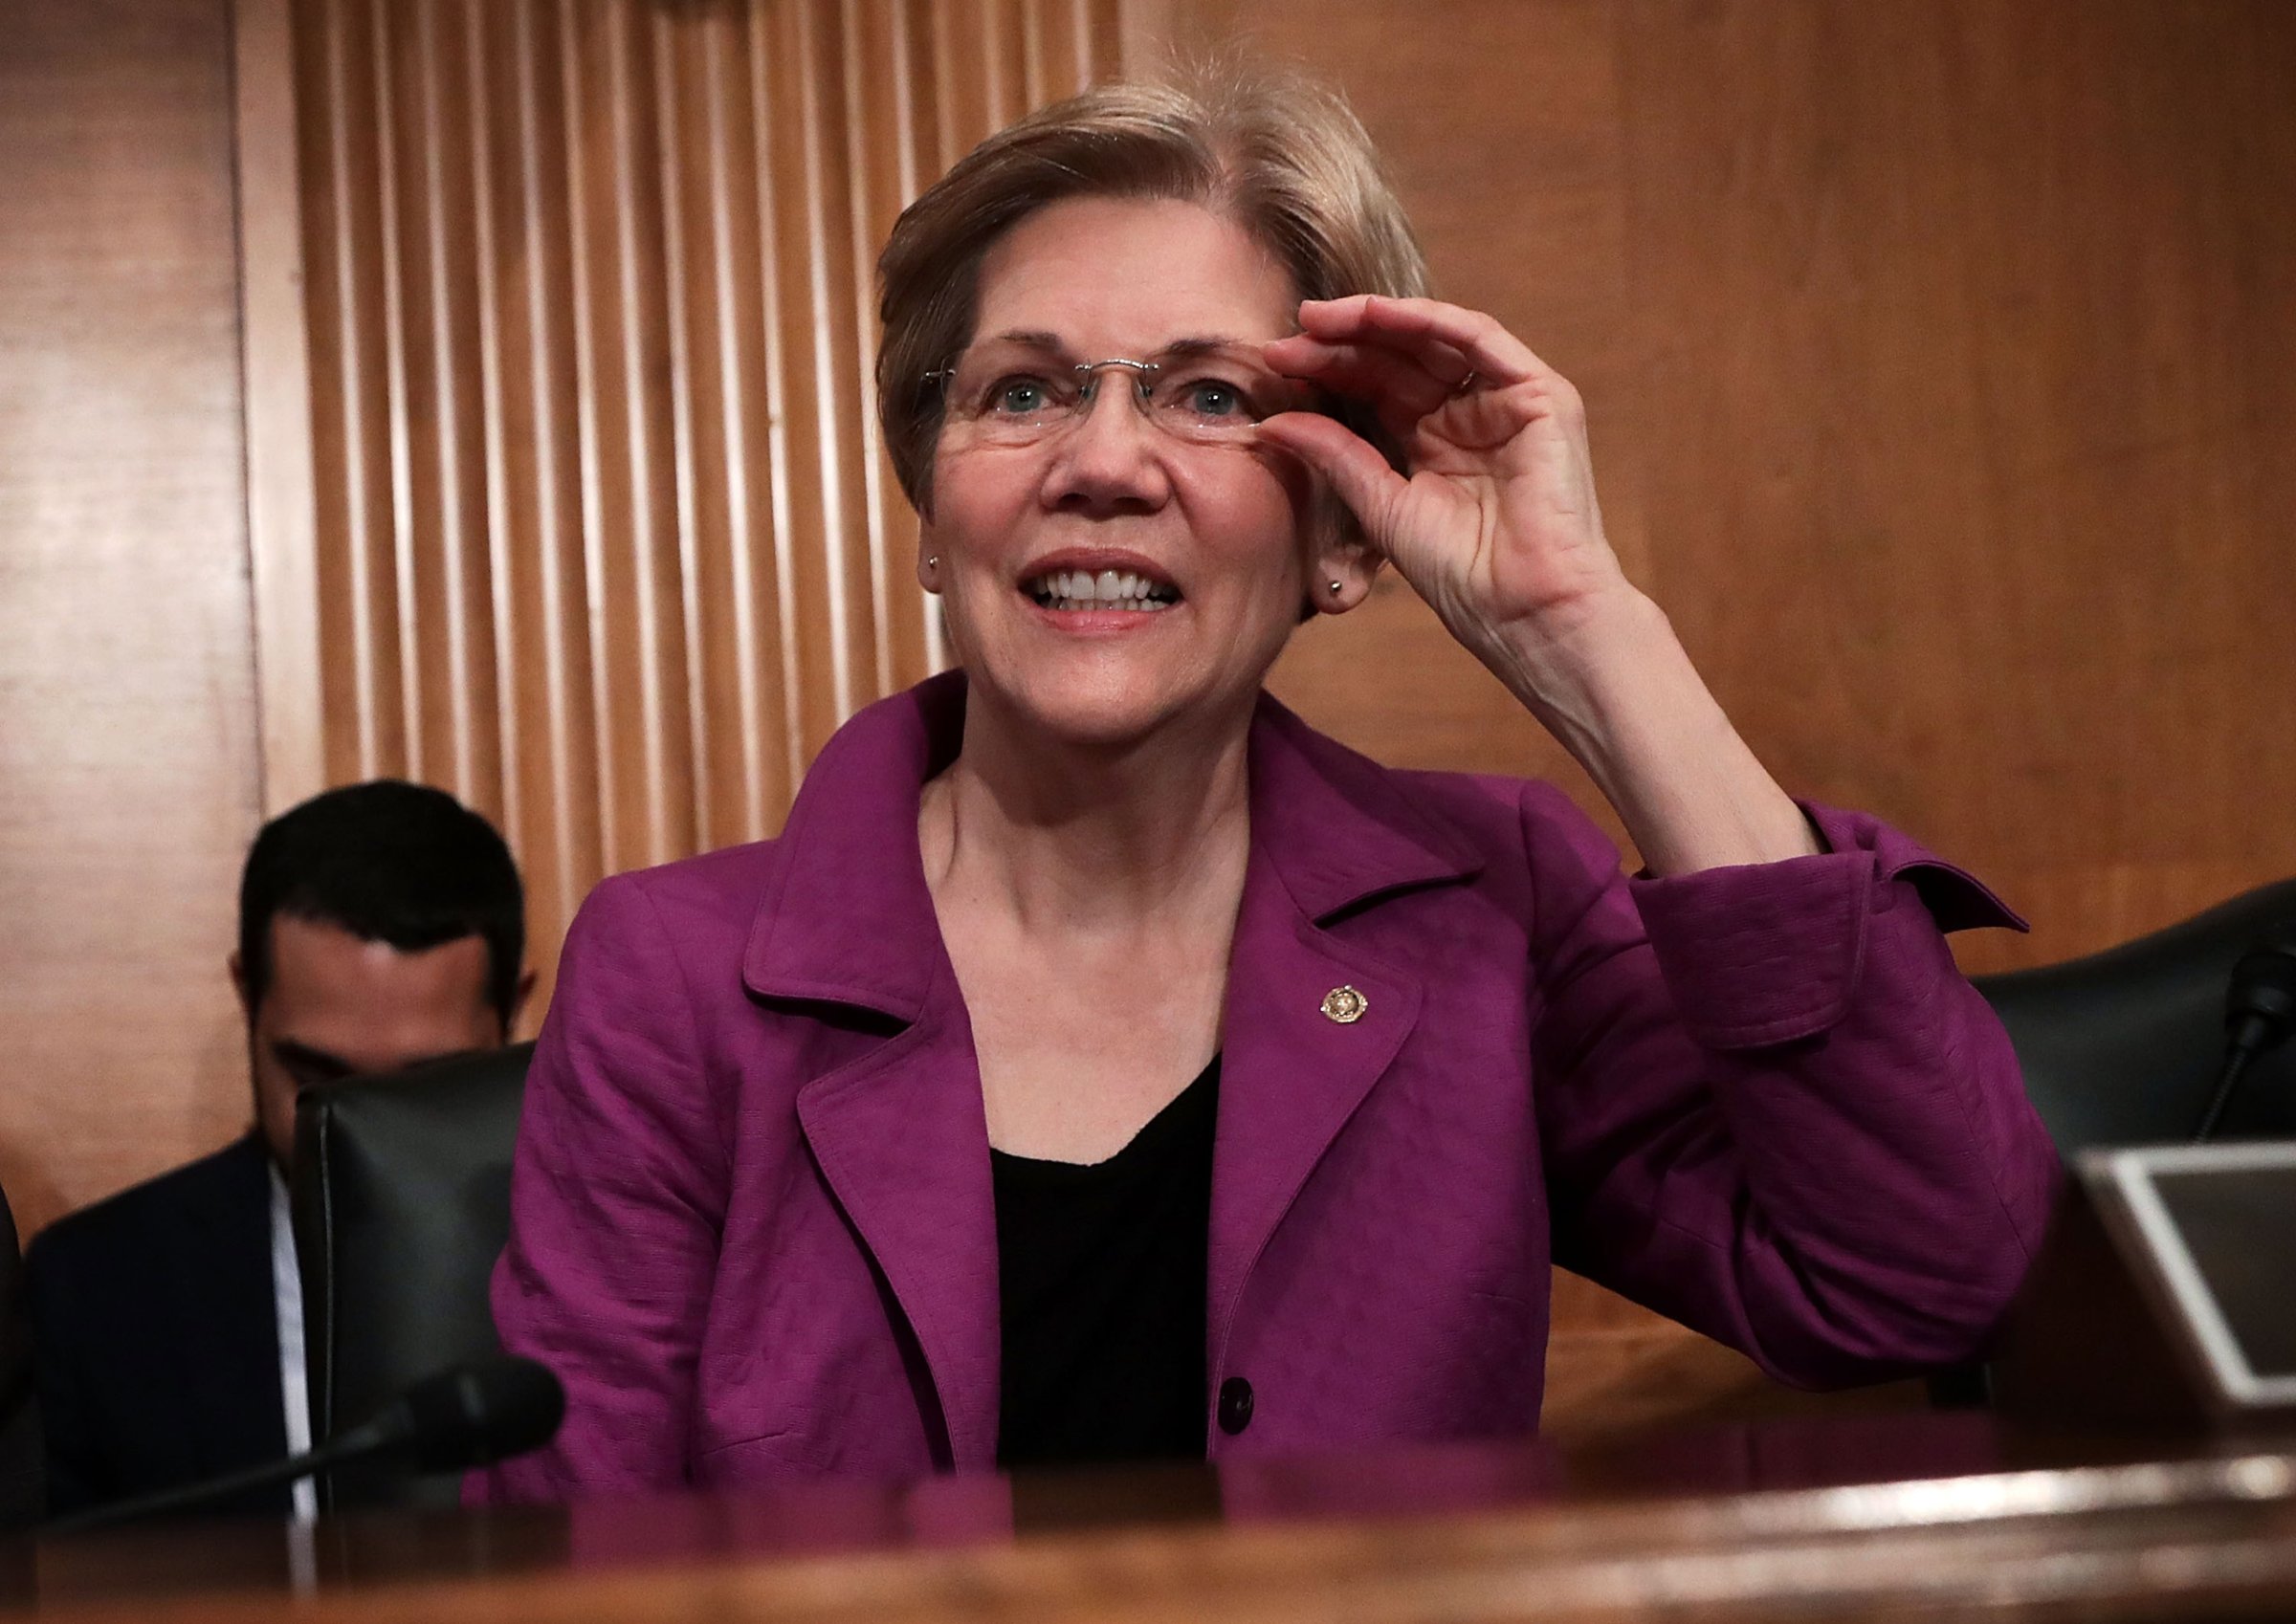 Sen. Elizabeth Warren waits for the beginning of a hearing before the Senate Banking, Housing and Urban Affairs Committee in Washington, D.C., April 7, 2016.